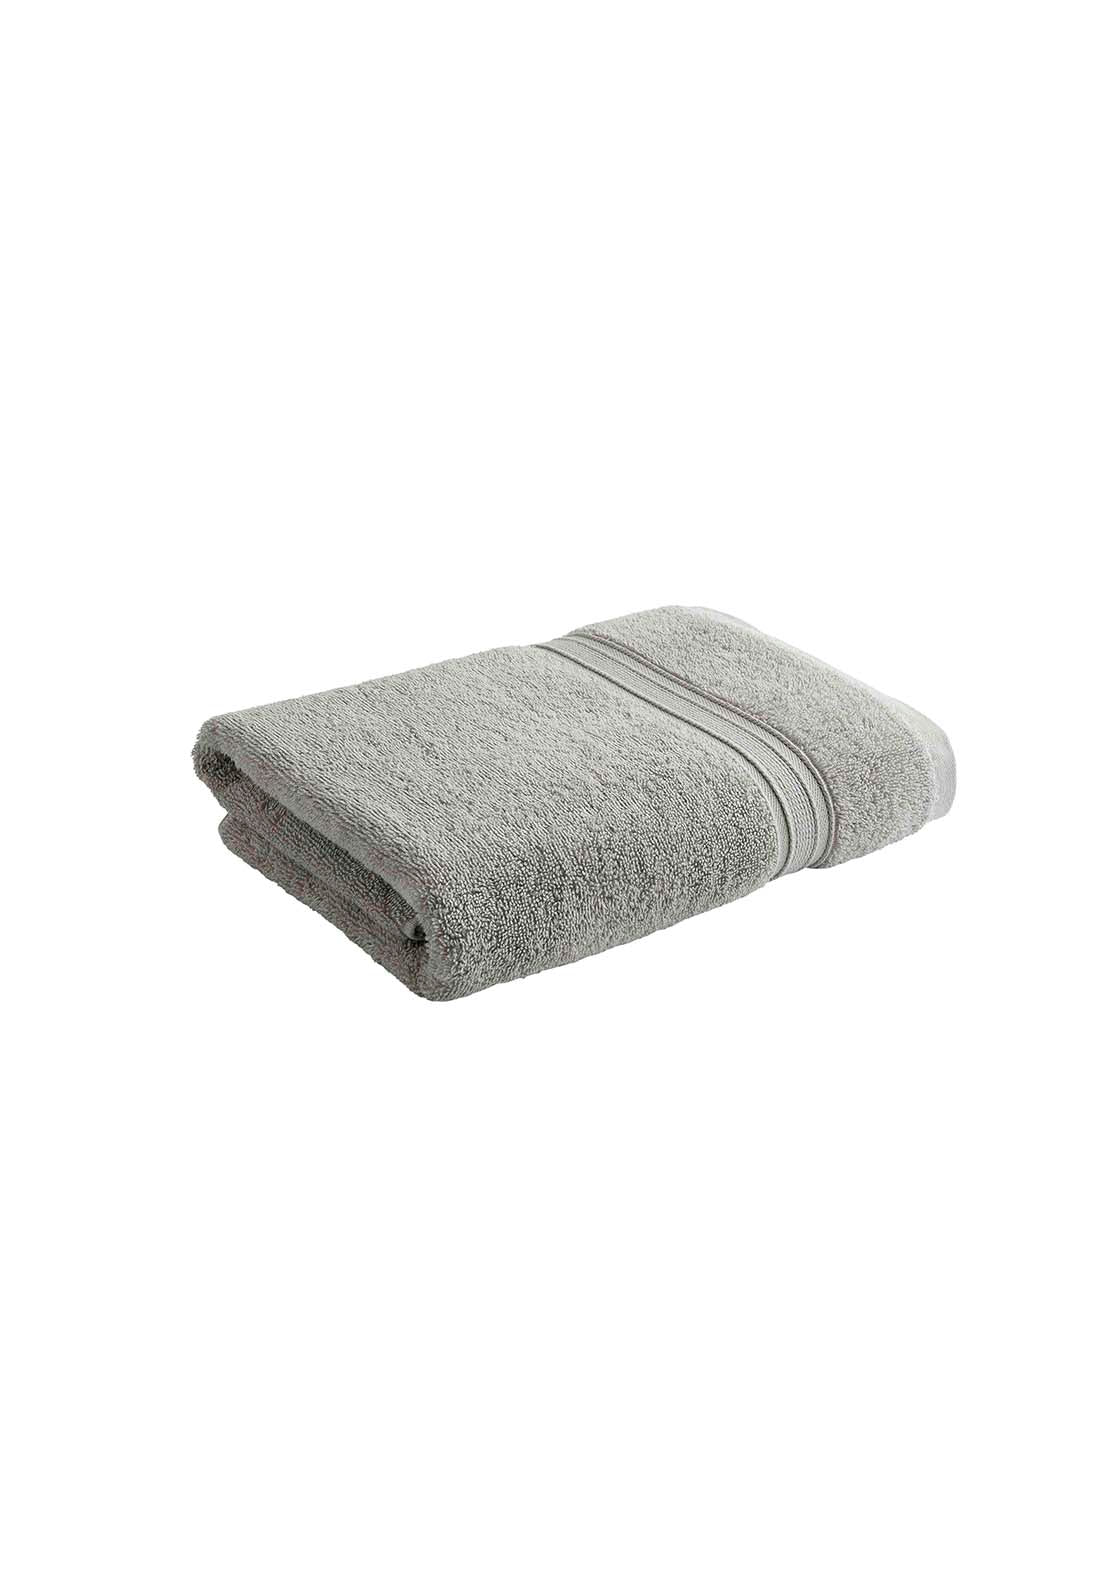 Christy Serene Hand Towel - Dove Grey 1 Shaws Department Stores